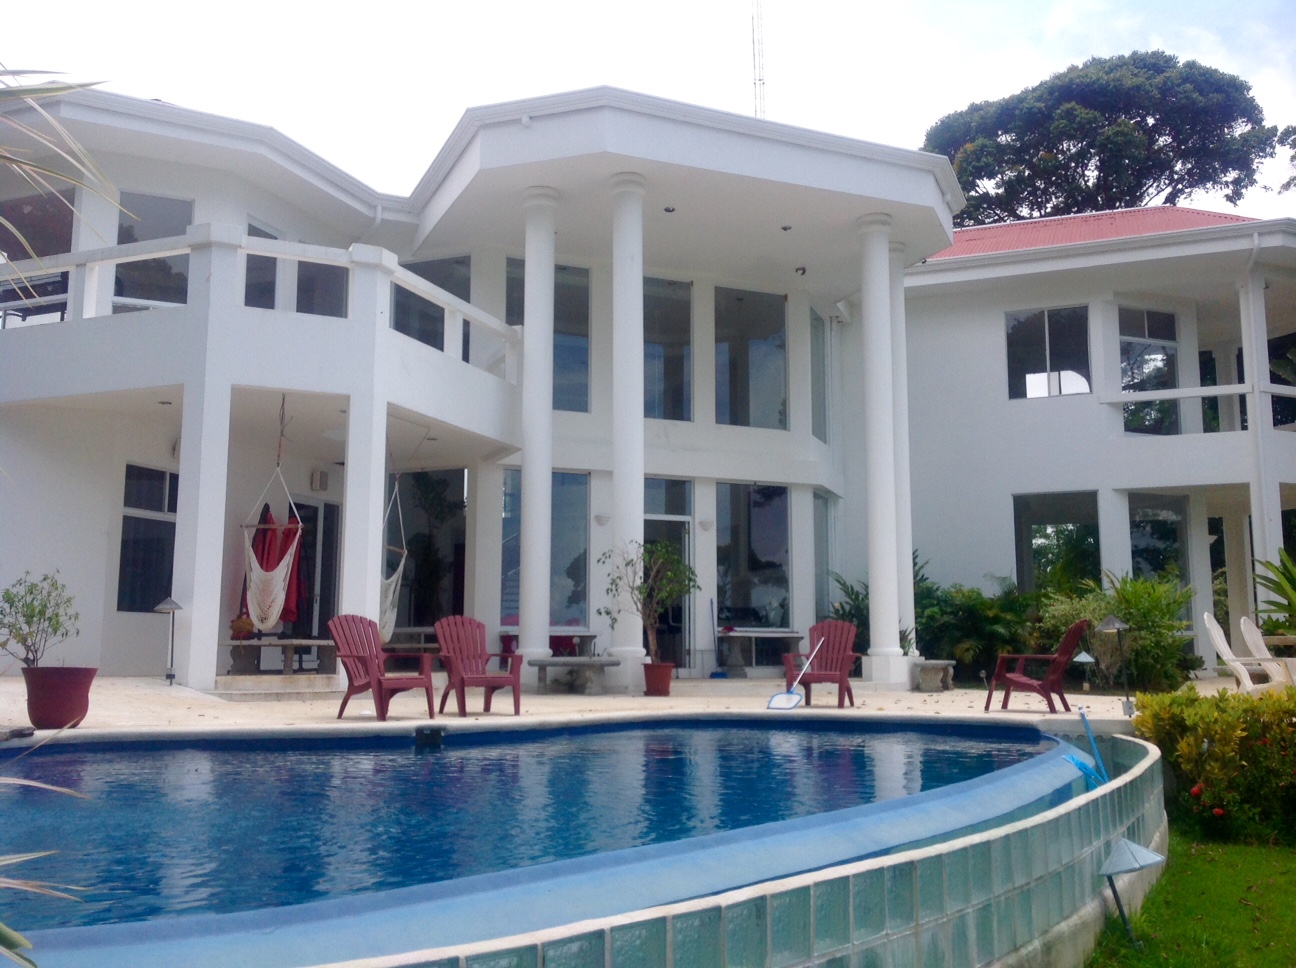 14.5 ACRES - 5 Bedroom Ocean View Estate With Complete Privacy And More Building Sites!!!